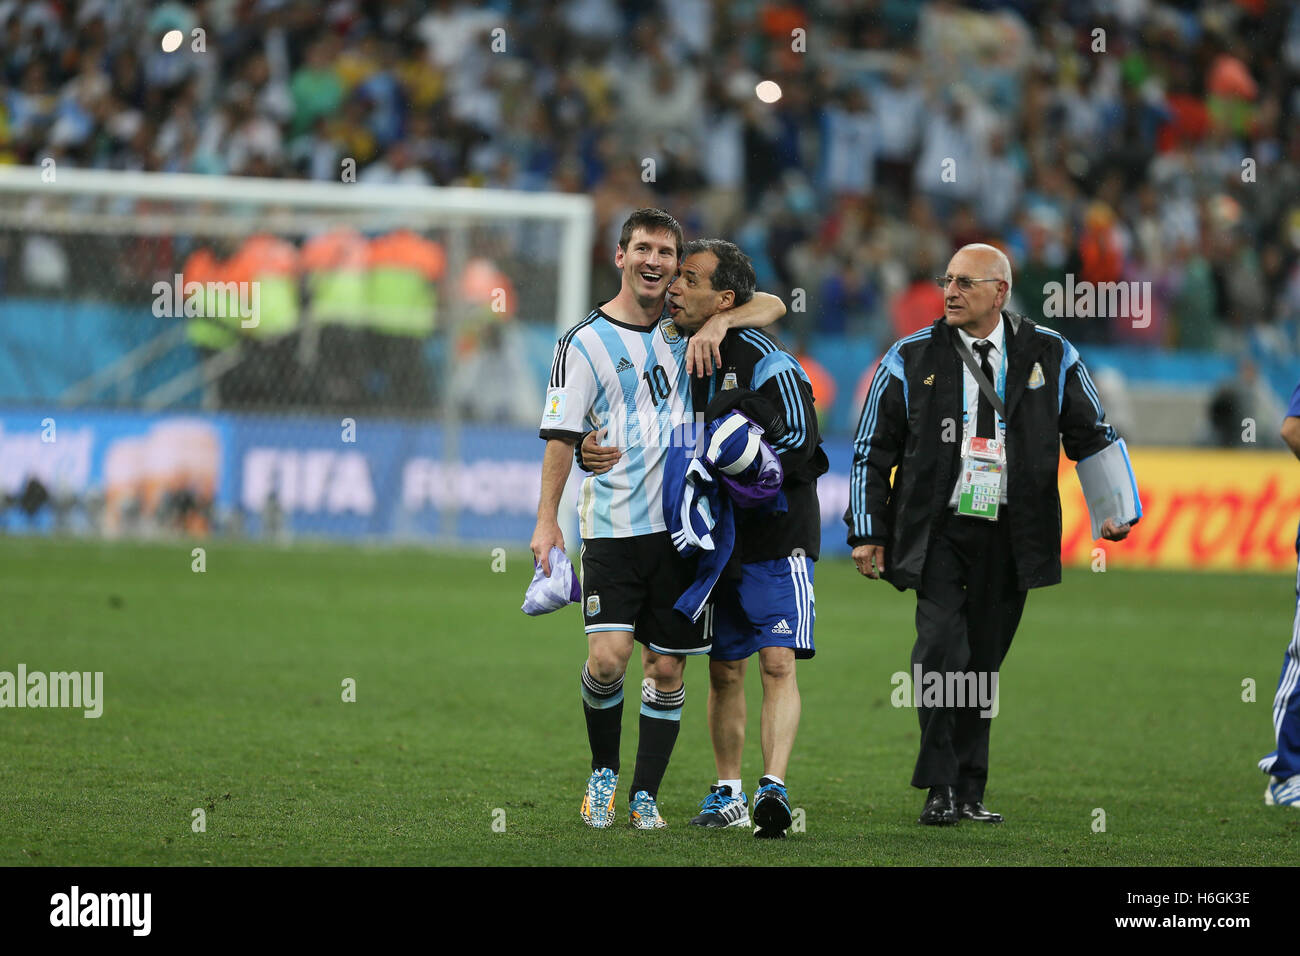 Maracana, Brazil, July, 10, 2014 Lionel Messi of Argentina the world’s best foot ball player being congratulated by his coach in Stock Photo